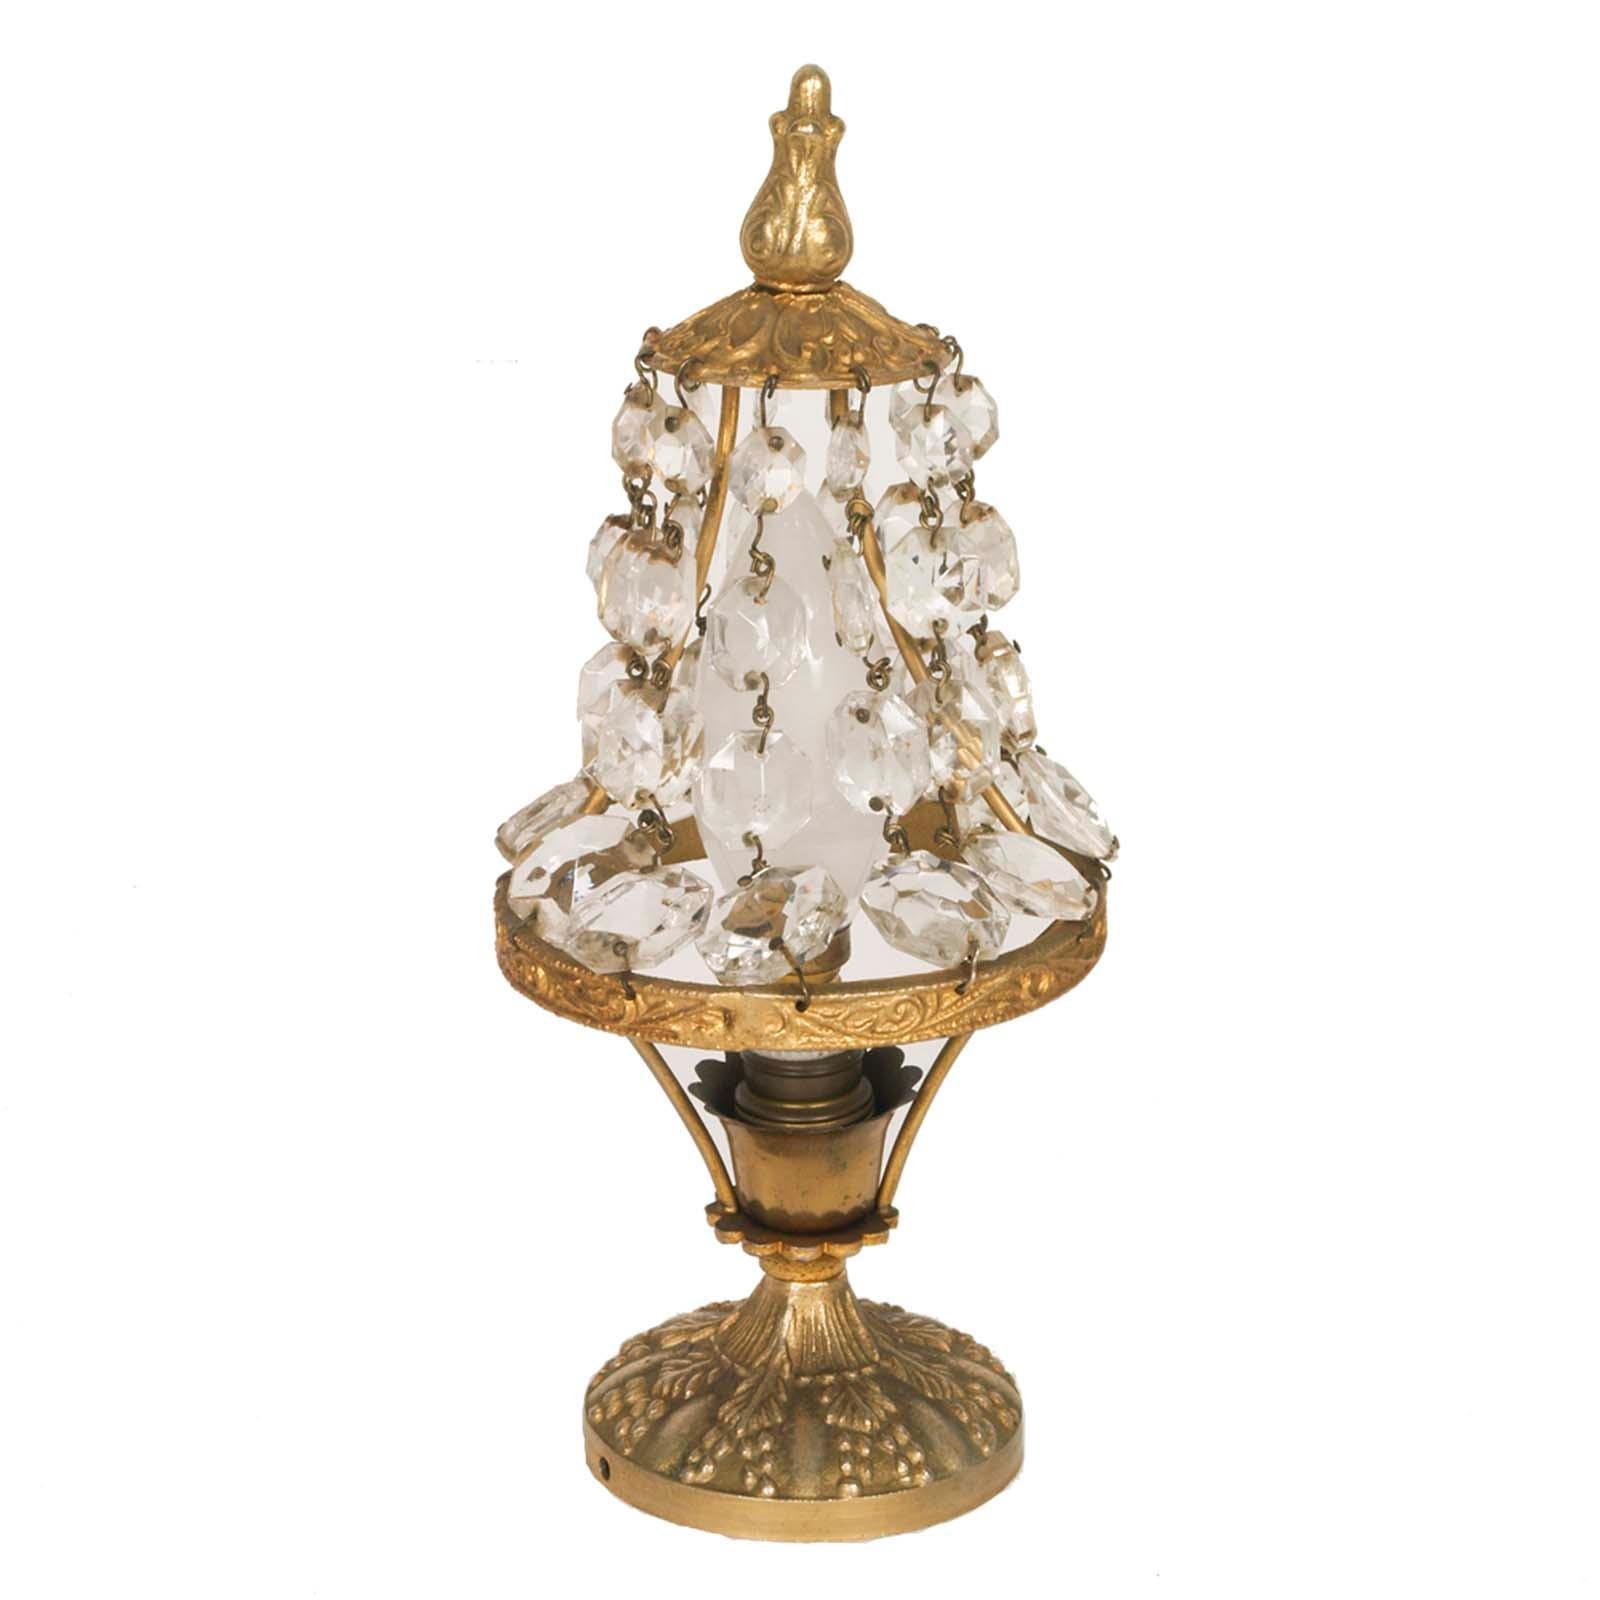 Antique small one lamp pairs bedside lamps Maria Theresa in golden bronze and drops Swarovski crystal. Electrical system redone.